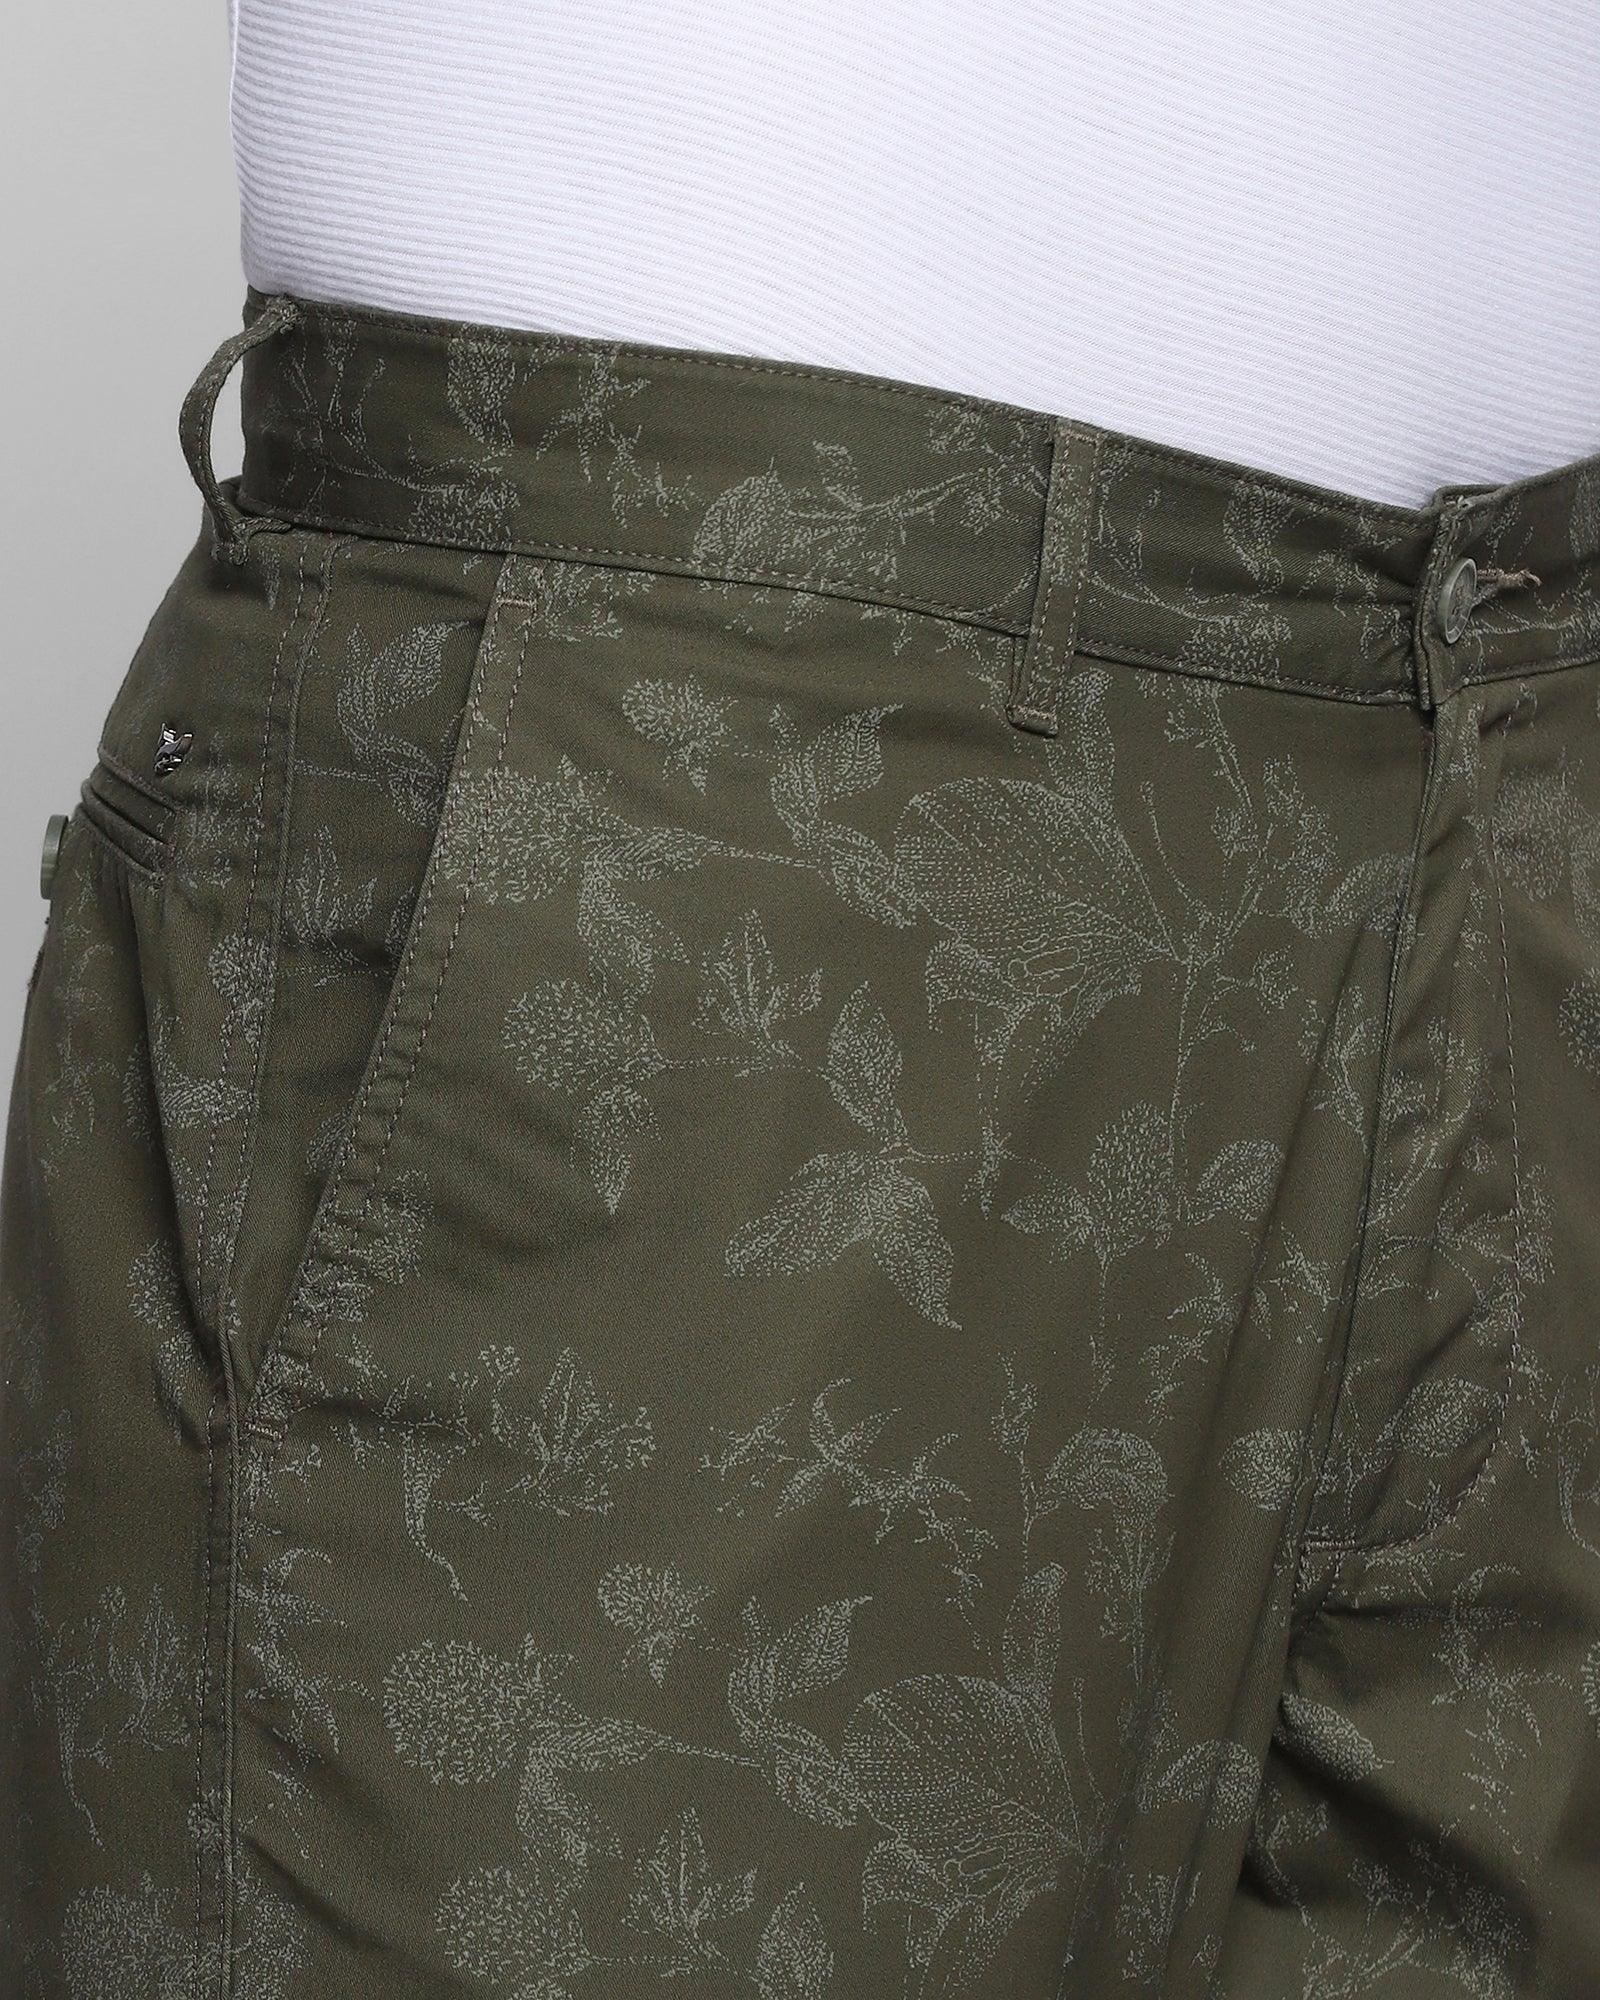 Casual Olive Printed Shorts - Fred